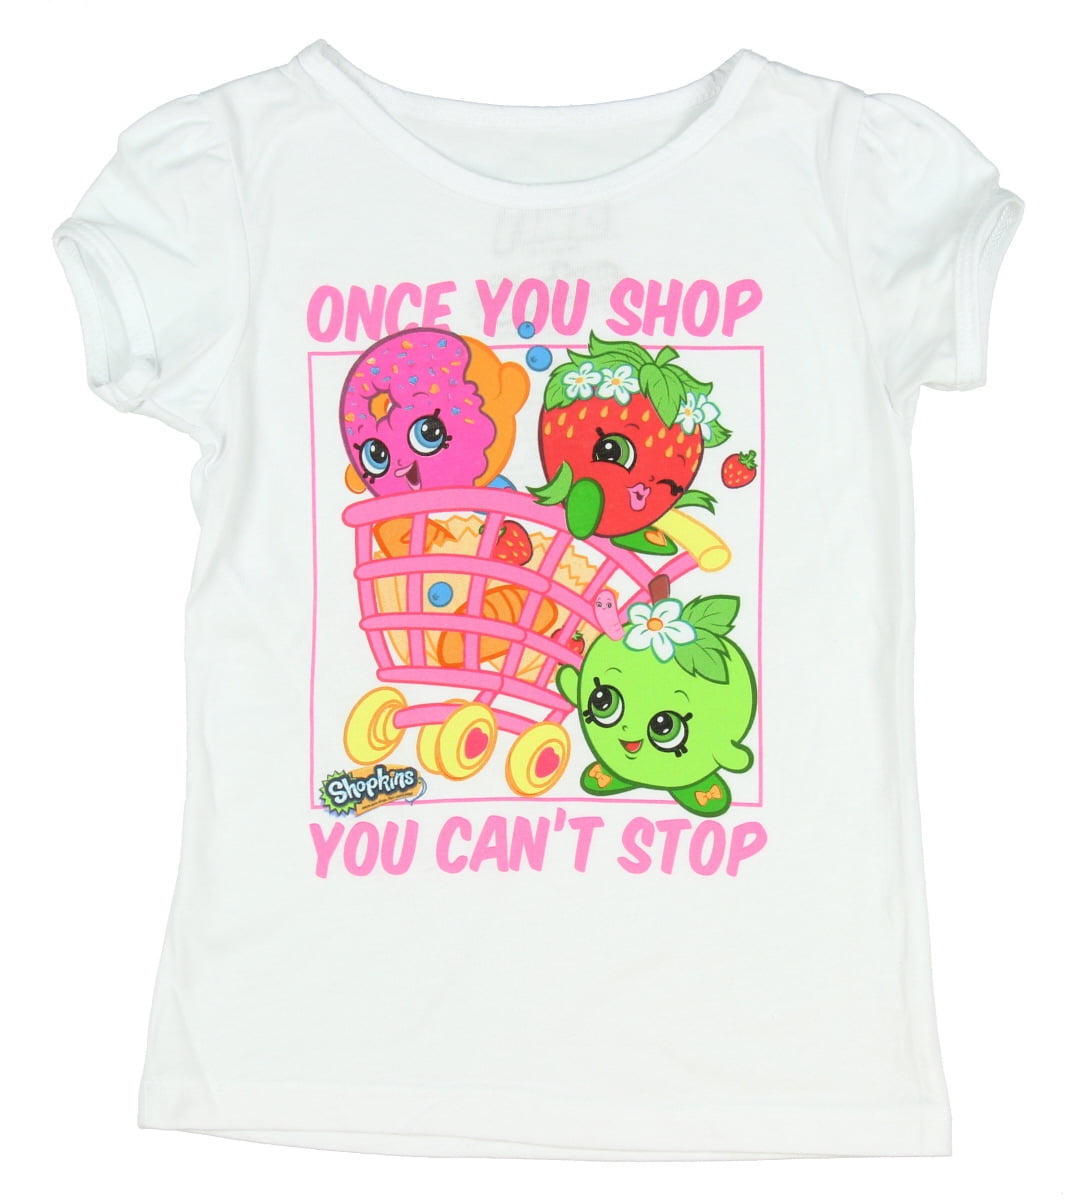 NEW GIRLS SHOPKINS BLACK LOVE TO SHOP GRAPHIC T-SHIRT 4-10 YEARS Great Gift 